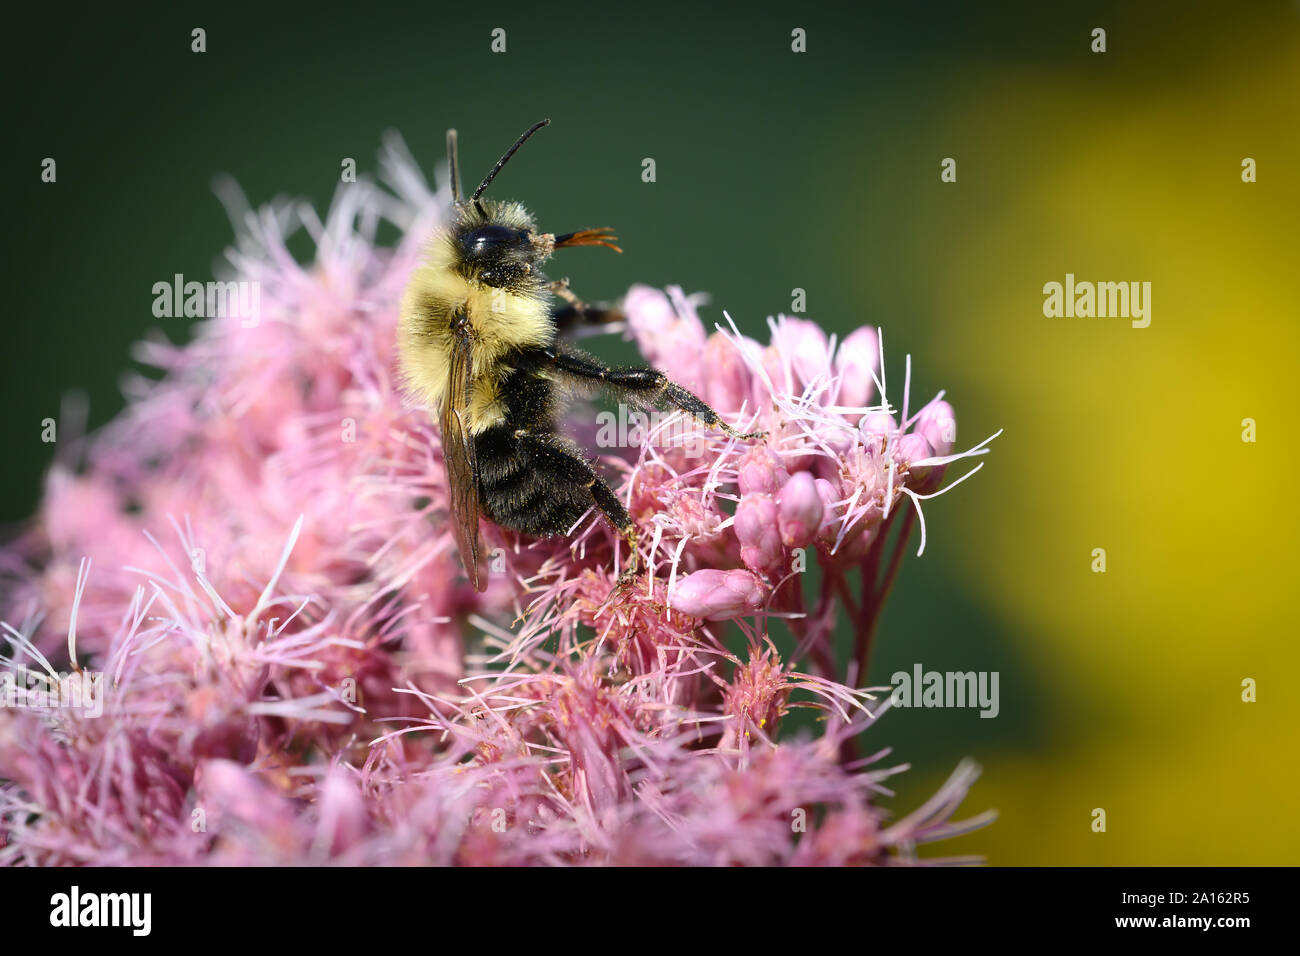 A Common Eastern Bumblebee sits back to groom itself on Spotted Joe-Pye Weed at the Dufferin Islands nature park in Niagara Falls, Canada. Stock Photo